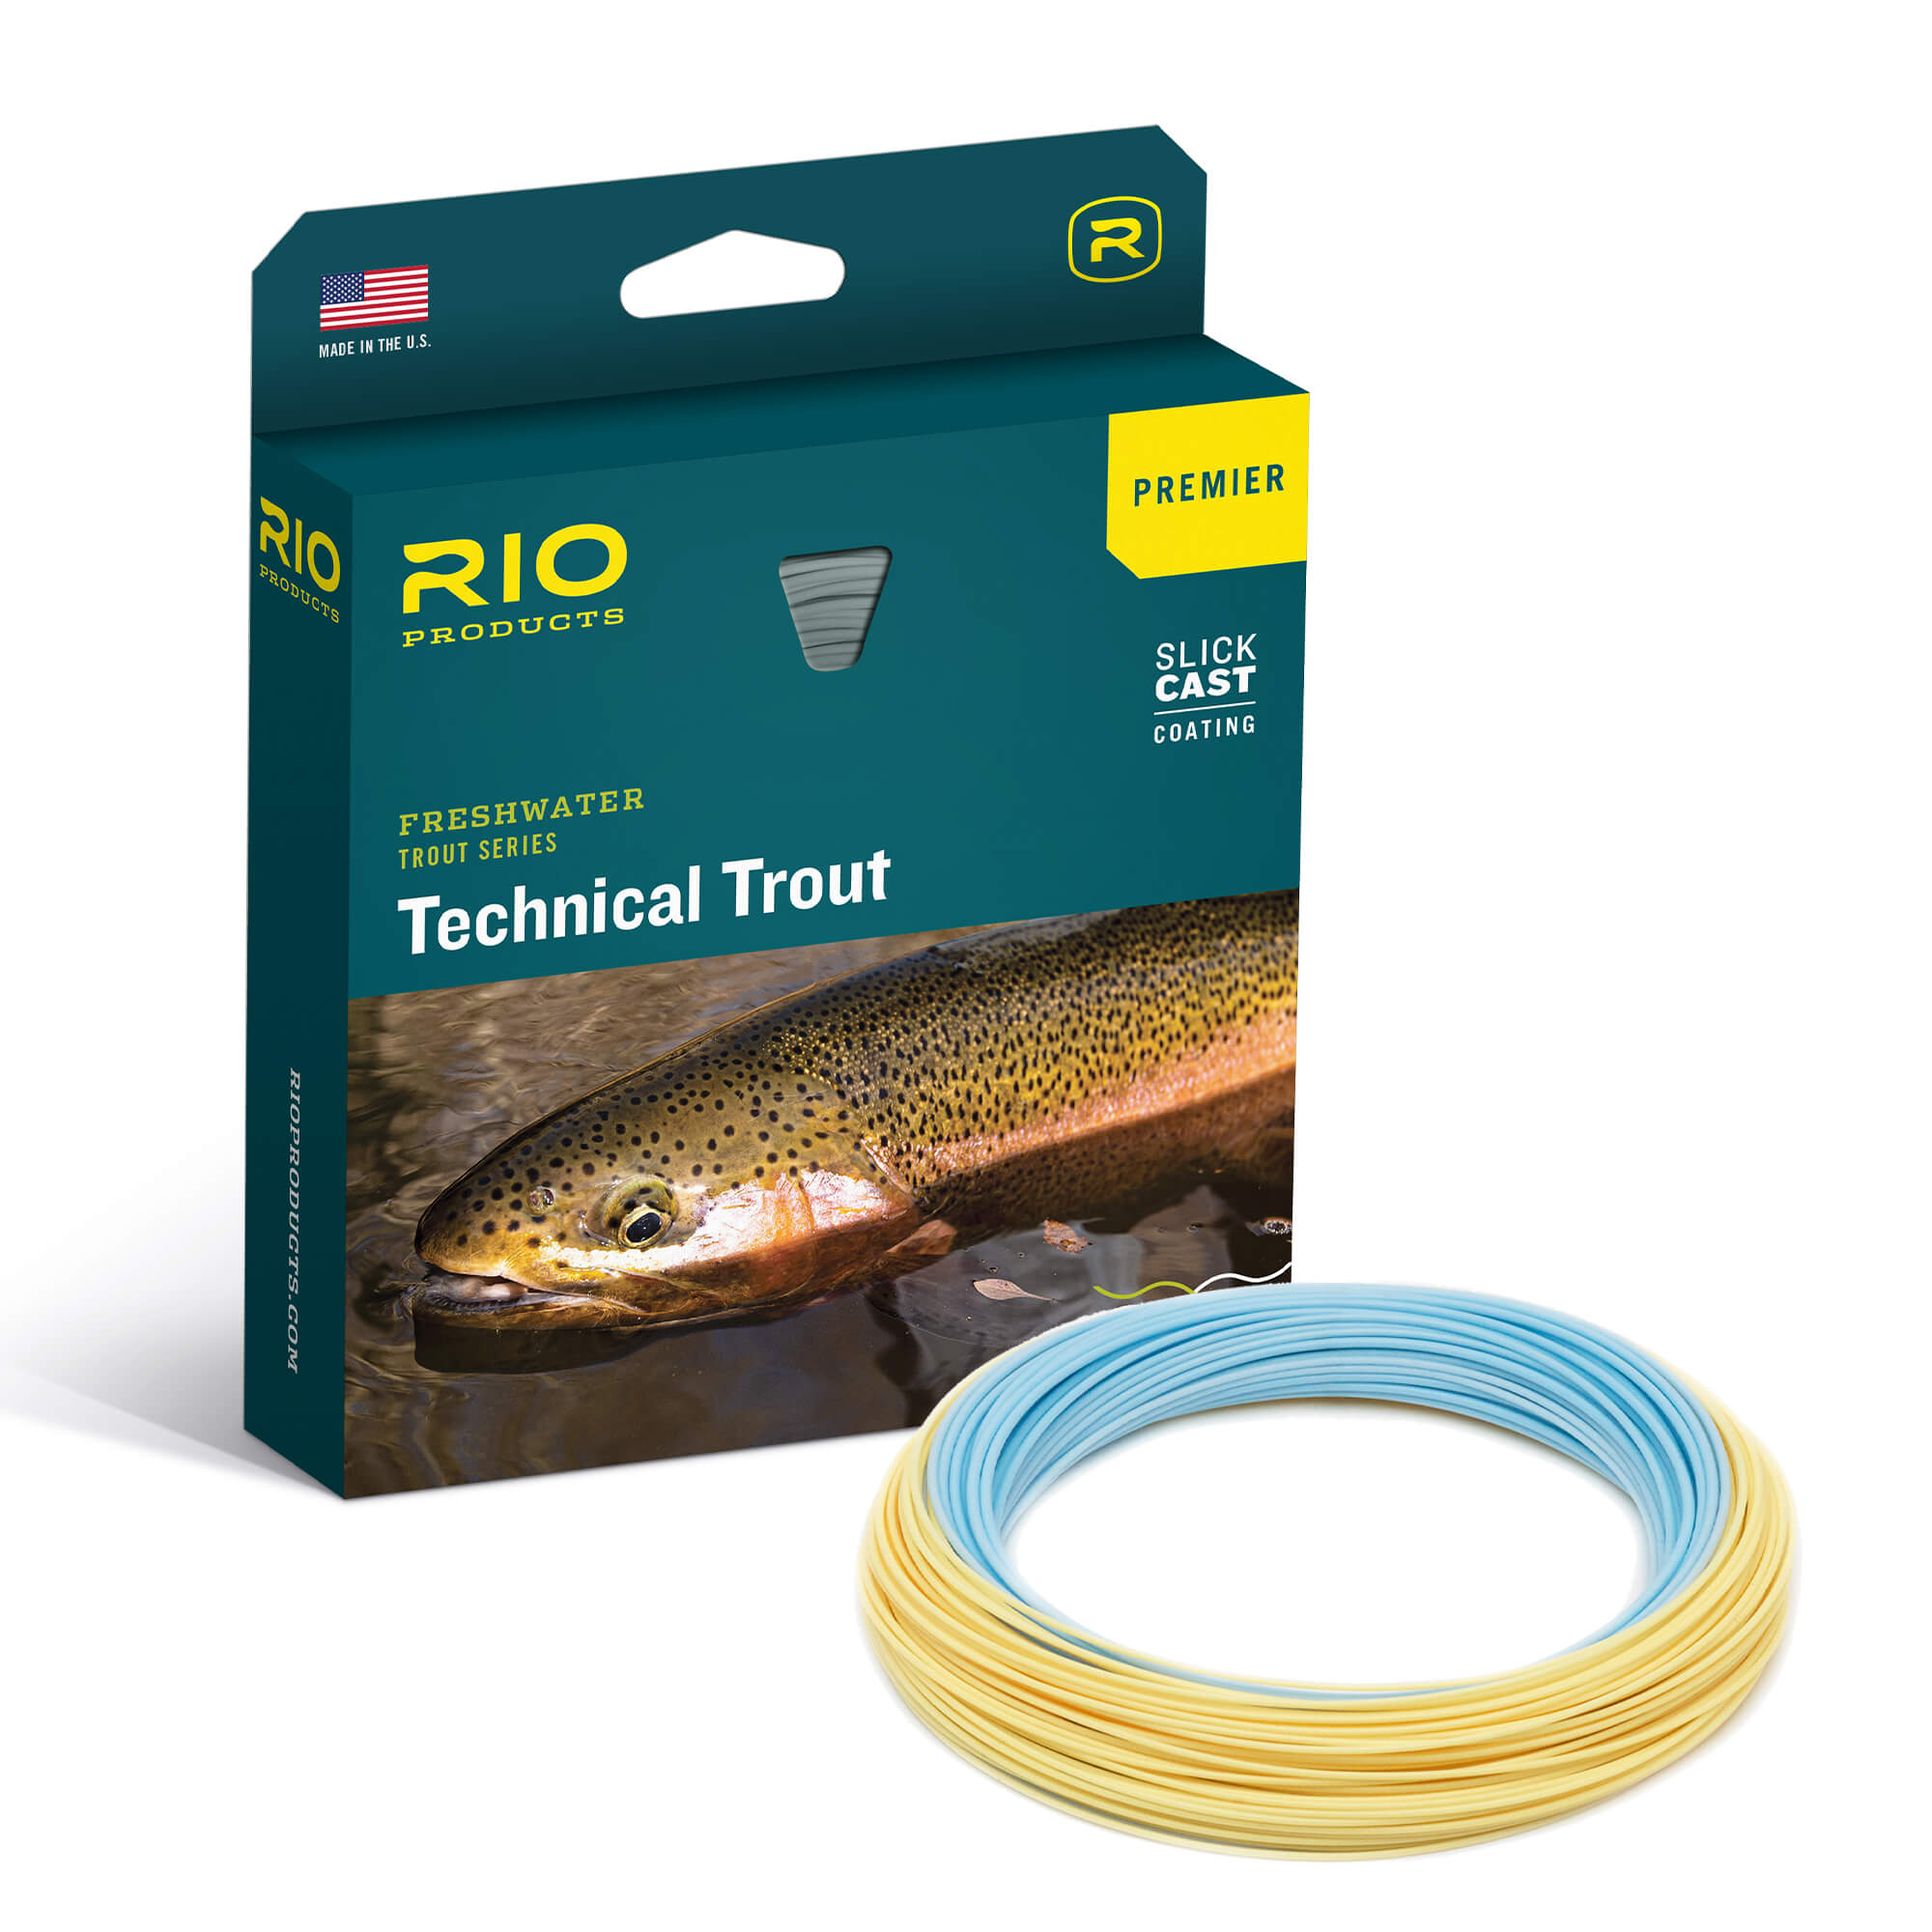 RIO Premier Technical Trout Fly Line – Guide Flyfishing